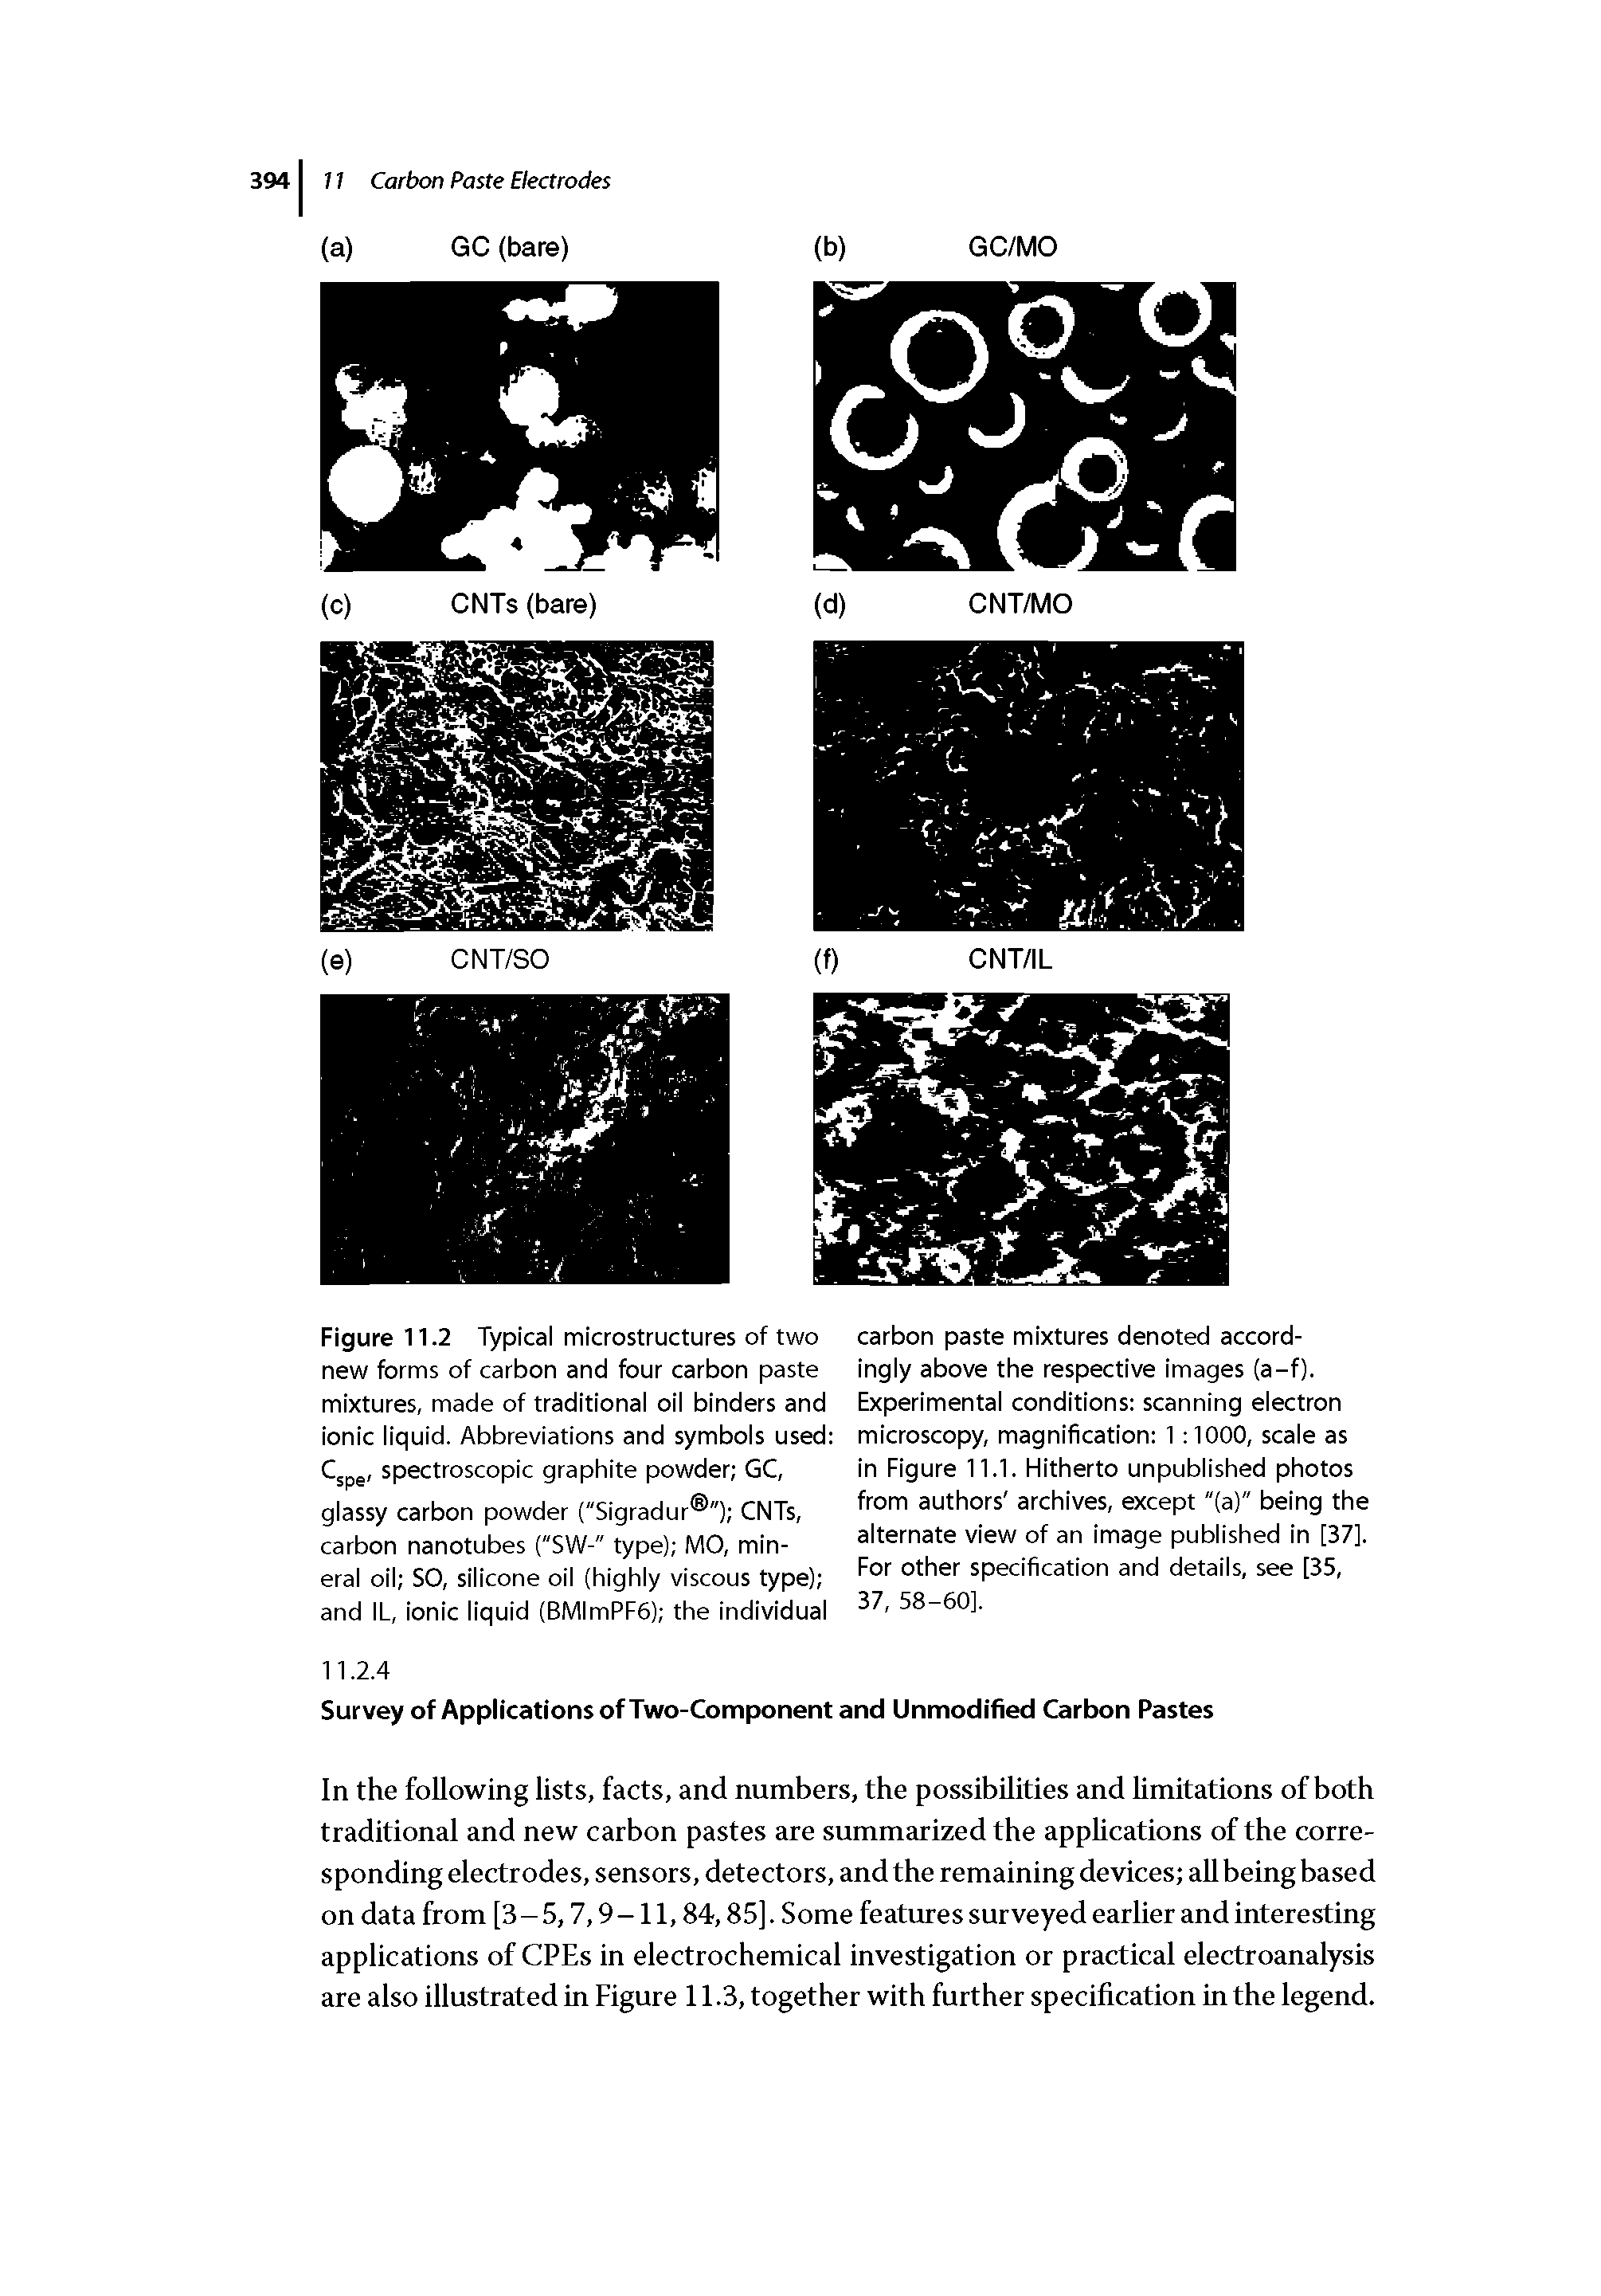 Figure 11.2 Typical microstructures of two new forms of carbon and four carbon paste mixtures, made of traditional oil binders and ionic liquid. Abbreviations and symbols used Cjpg, spectroscopic graphite powder GC, glassy carbon powder ("Sigradur ") CNTs, carbon nanotubes ("SW-" type) MO, mineral oil SO, silicone oil (highly viscous type) and IL, ionic liquid (BMImPF6) the individual...